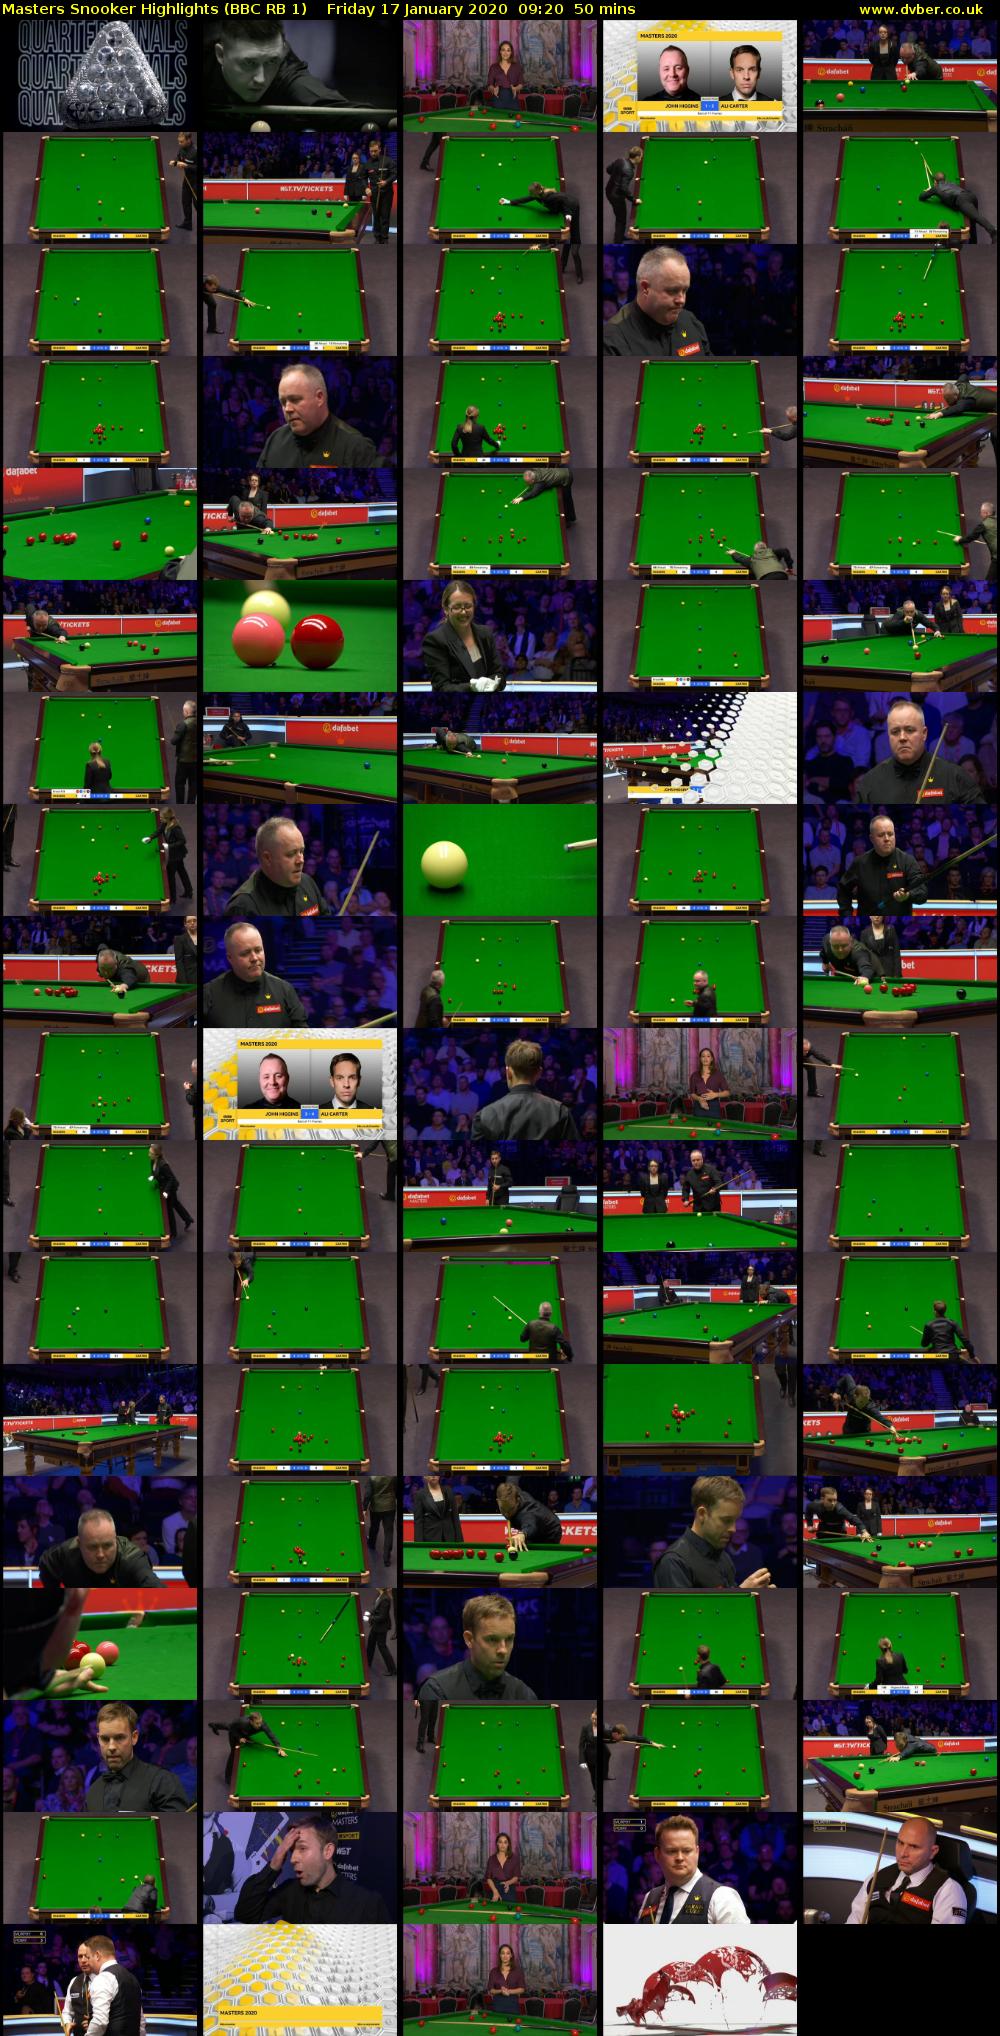 Masters Snooker Highlights (BBC RB 1) Friday 17 January 2020 09:20 - 10:10